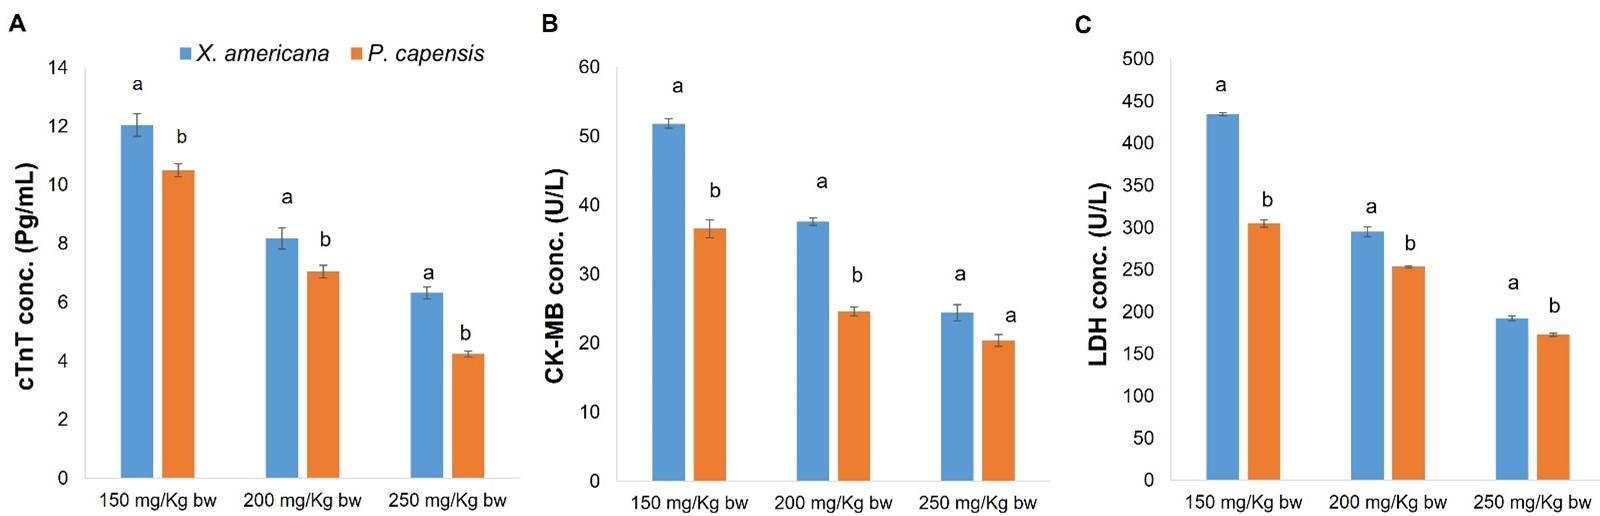 Cardiocurative effects of aqueous leaf extracts of Ximenia americana (linn.) and Pappea capensis (eckl. and zeyh.) against myocardial infarction in rats